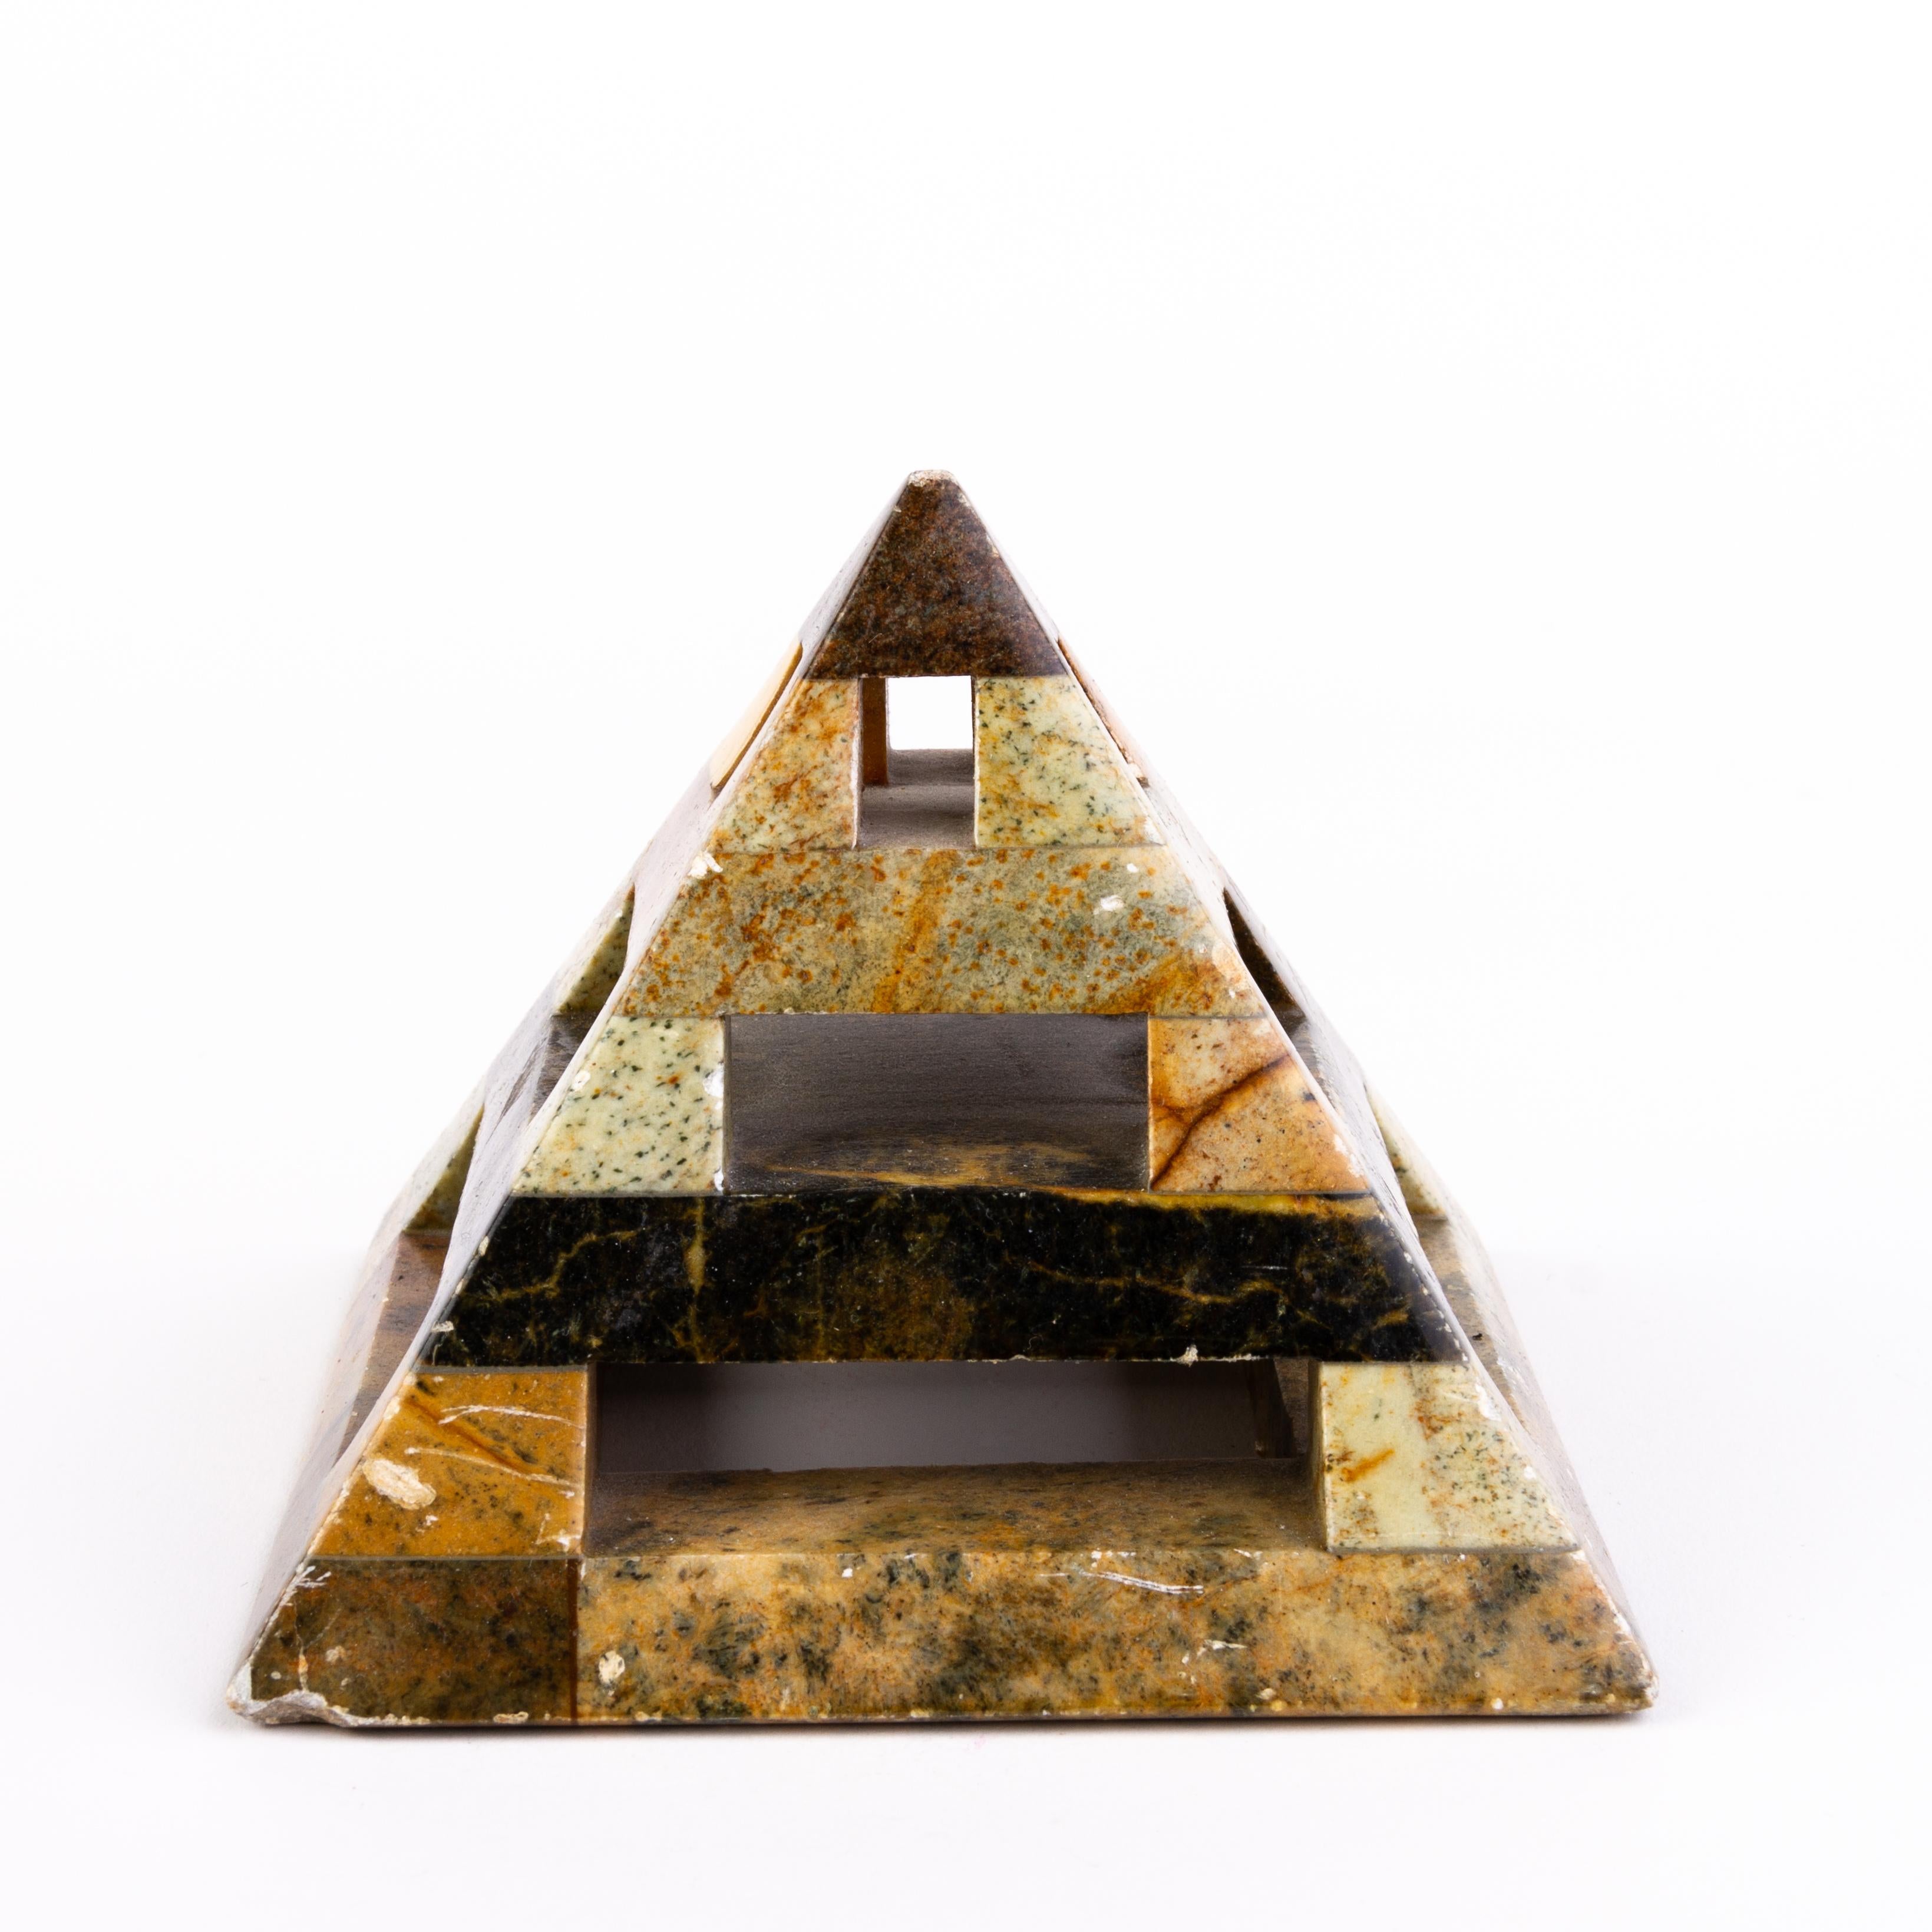 In good condition
From a private collection
Free international shipping
Grand Tour Geode Specimen Pyramid Desk Paperweight 